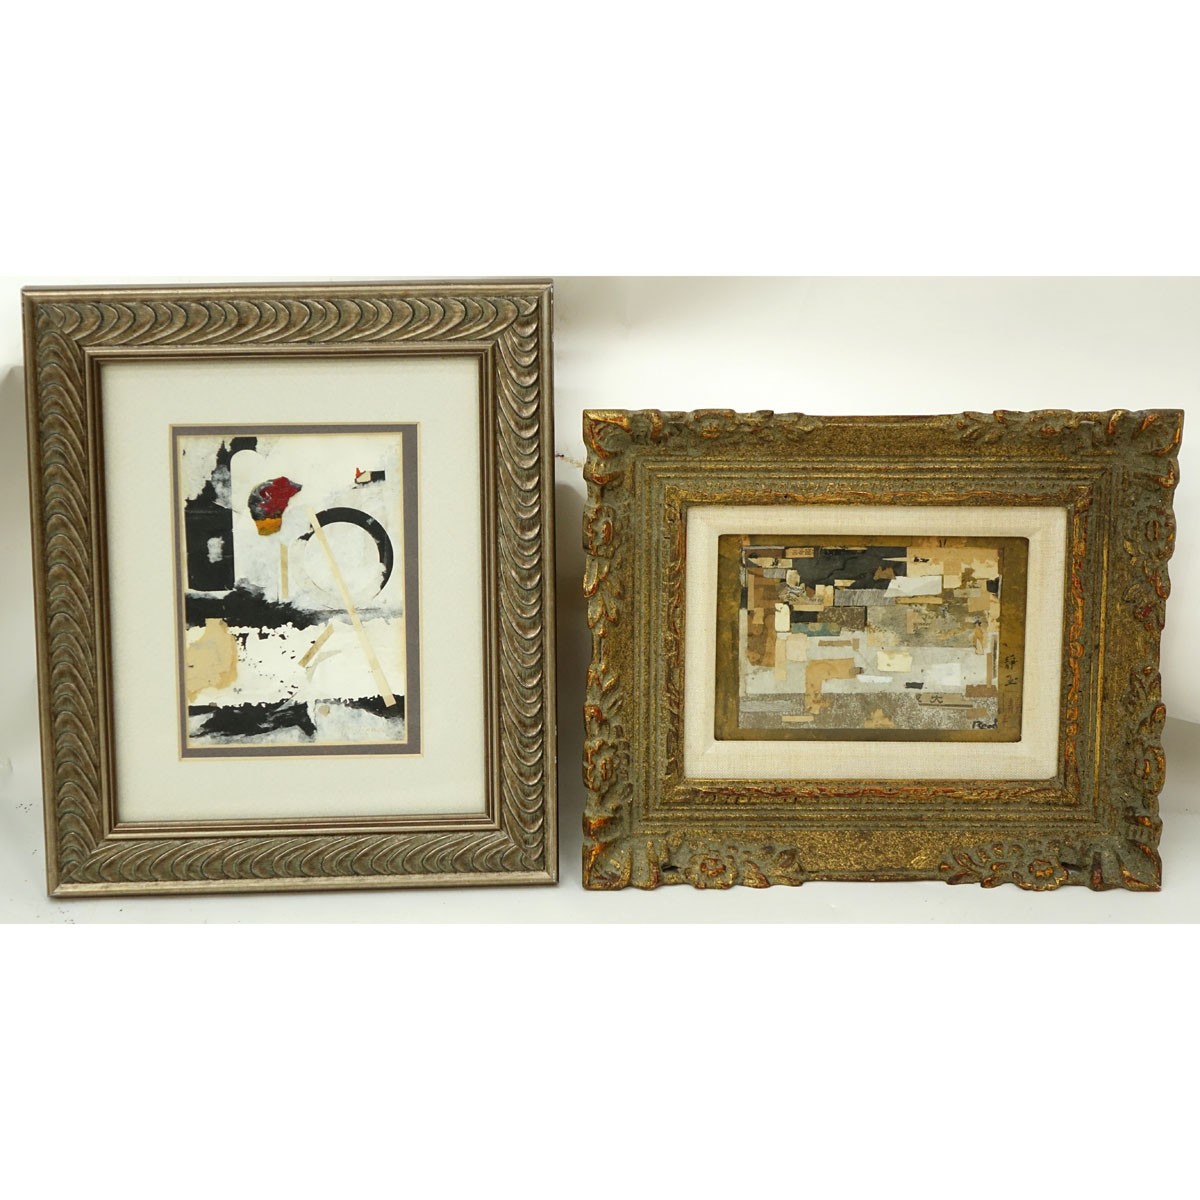 Two (2) Philip Standish Read, American (1927 - 2000) Mixed Media Collages, Abstract Compositions, Each Signed Lower Right, one is inscribed and dated 1993 en verso. Each in good condition.